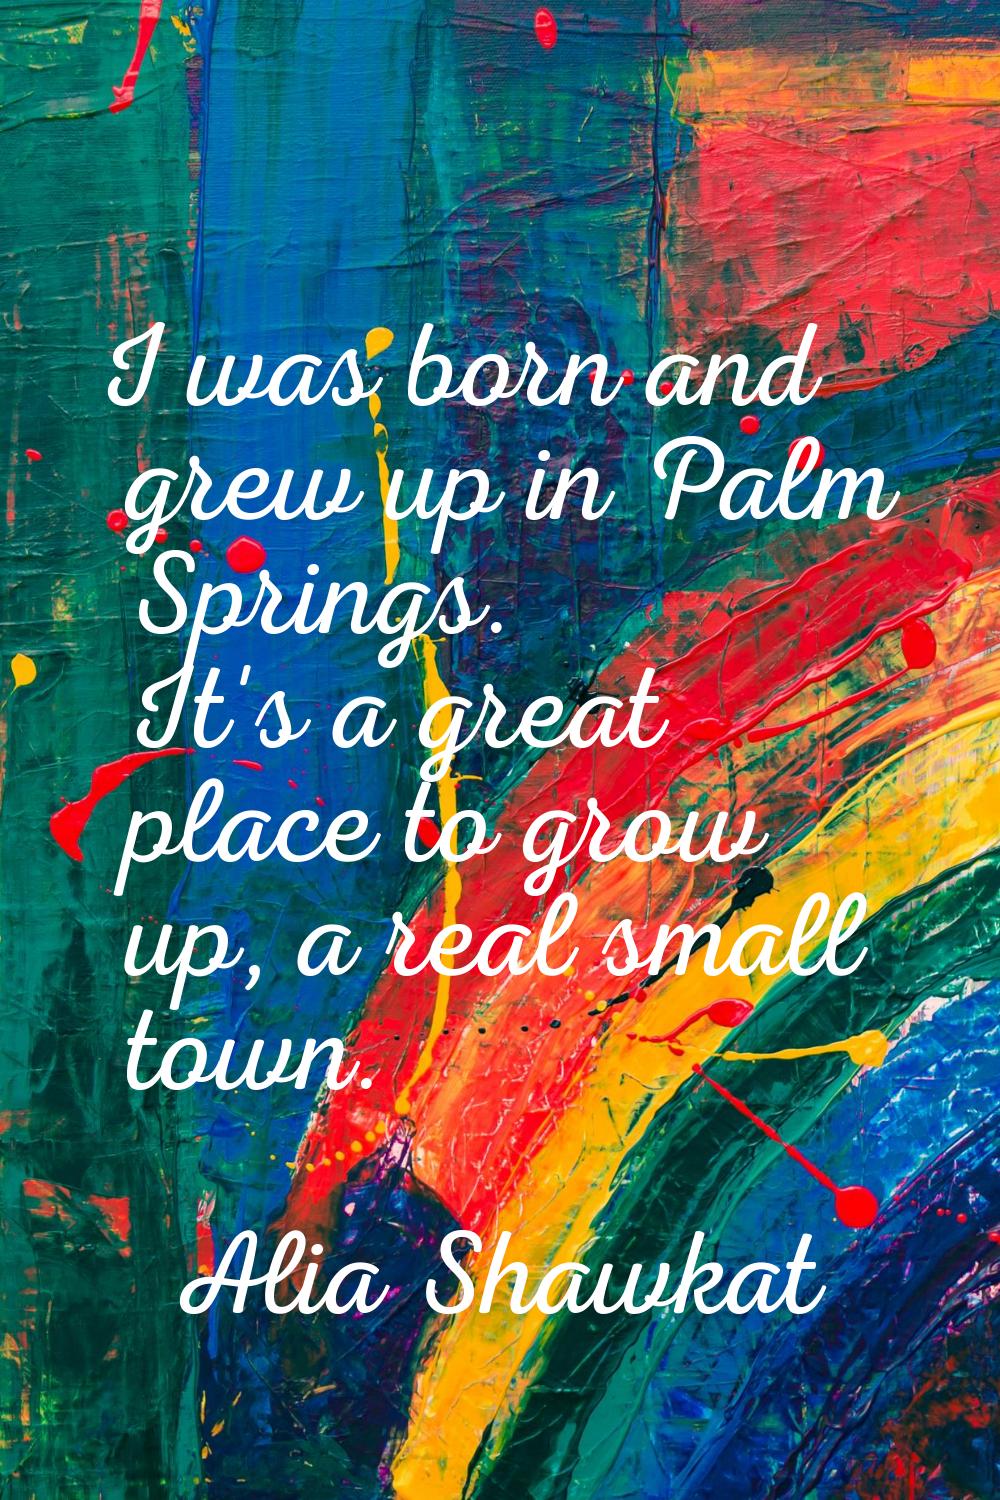 I was born and grew up in Palm Springs. It's a great place to grow up, a real small town.